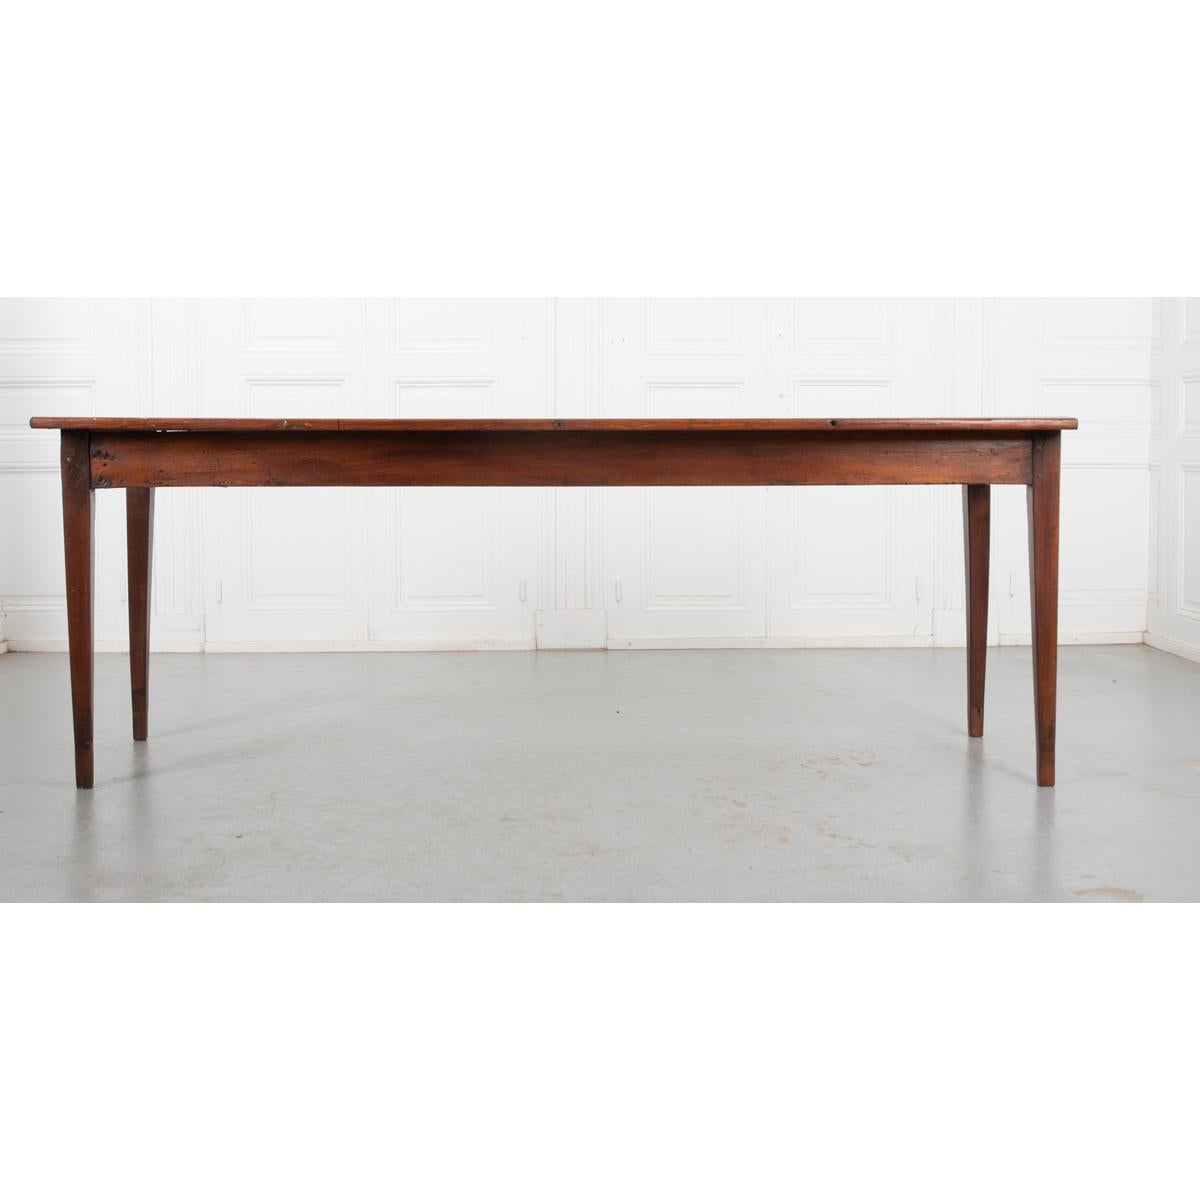 French Provincial French 19th Century Oak & Pine Farm Table